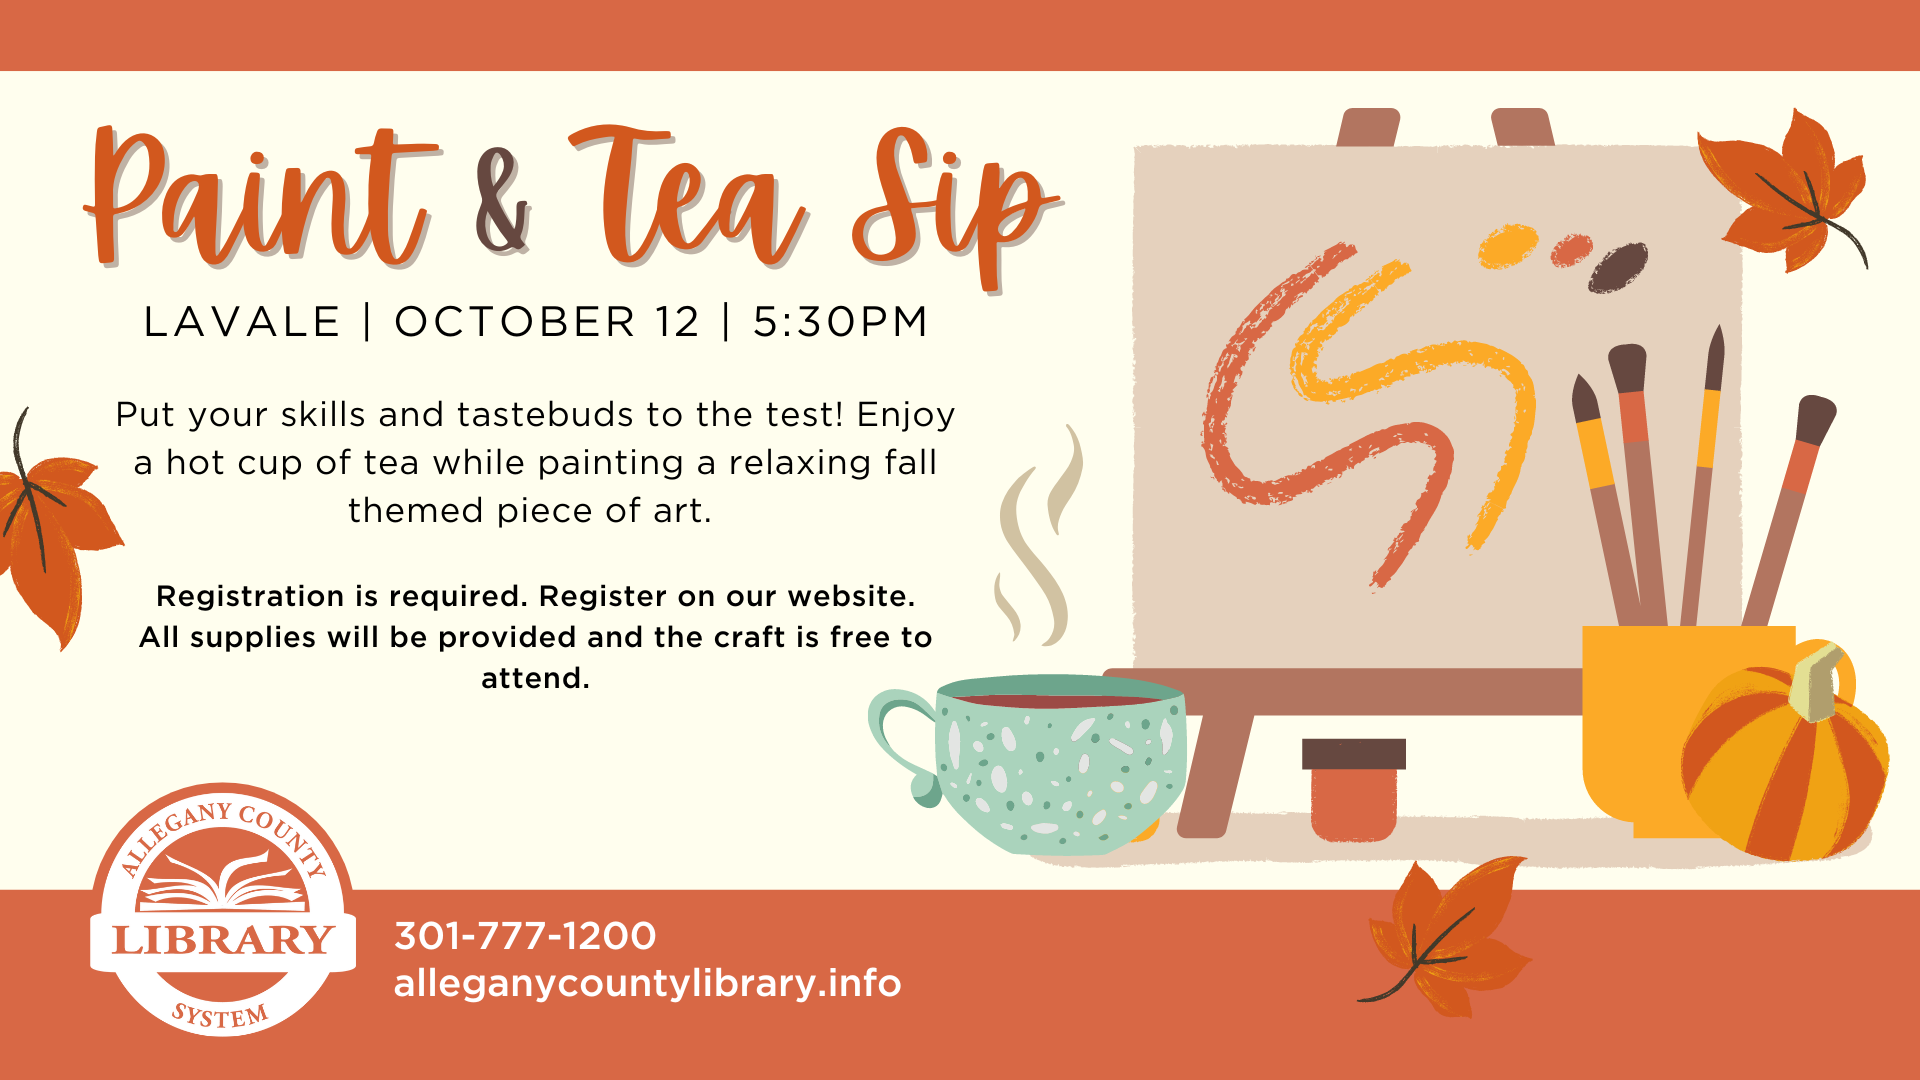 clipart of an easel with a pumpkin, paint brushes, and a steaming cup of tea. event details beside. 